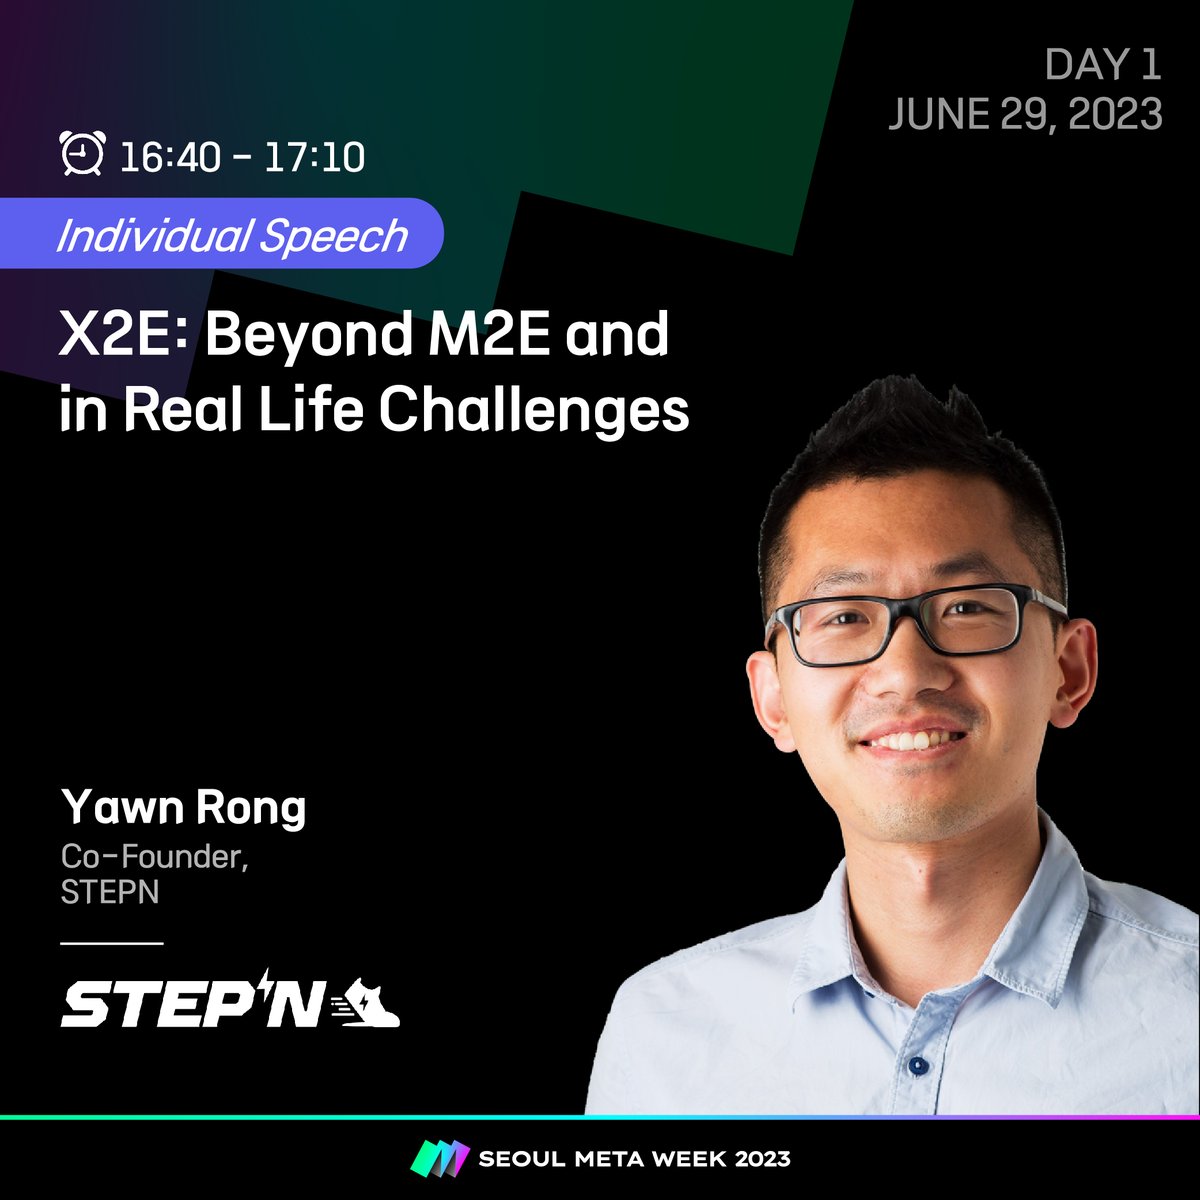 [DAY1] Individual Speech) X2E: Beyond M2E and in Real Life Challenges ✅ Yawn RongCo-Founder, STEPN Yawn Rong will be discussing about the topic on Beyond M2E and in Real Life Challenges 😮